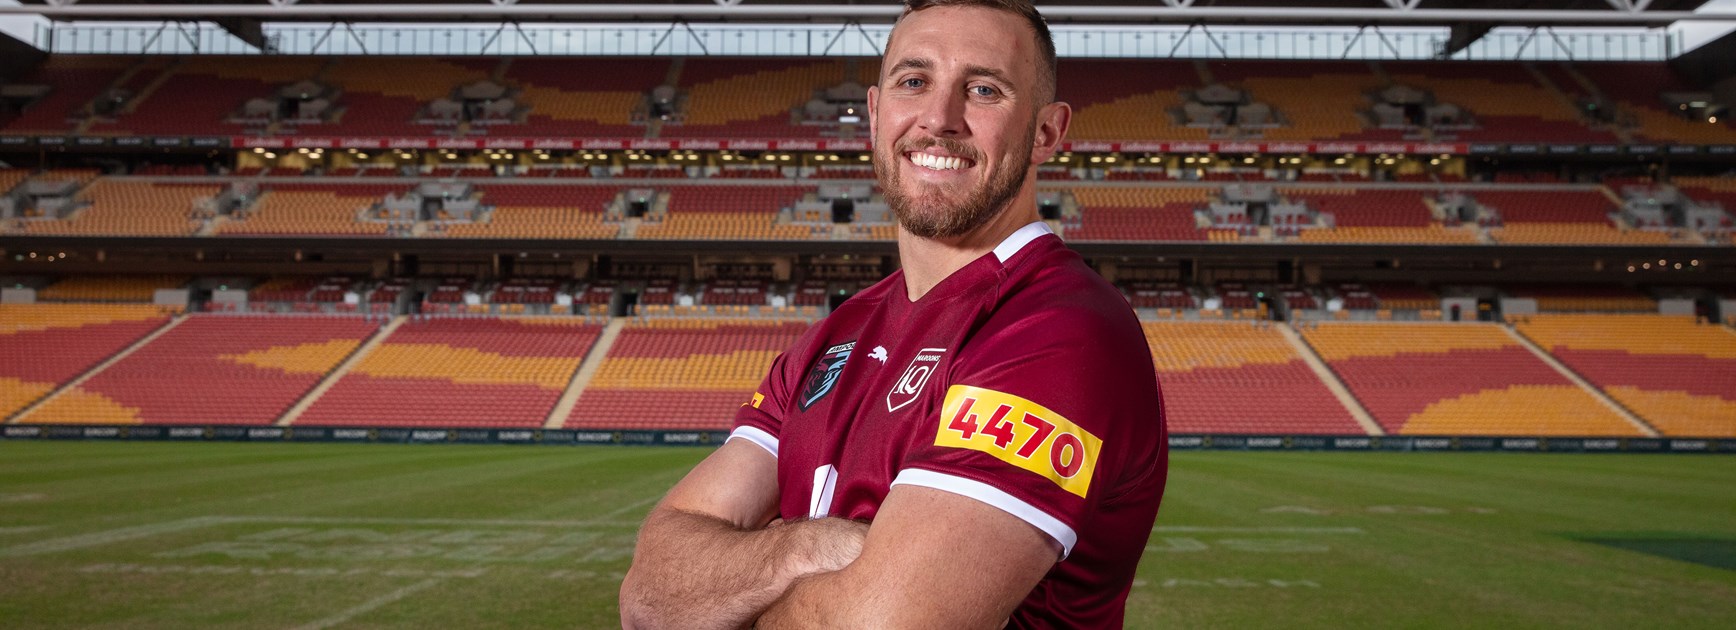 Maroons and XXXX 'give a XXXX' celebrate pride of Queensland | QRL